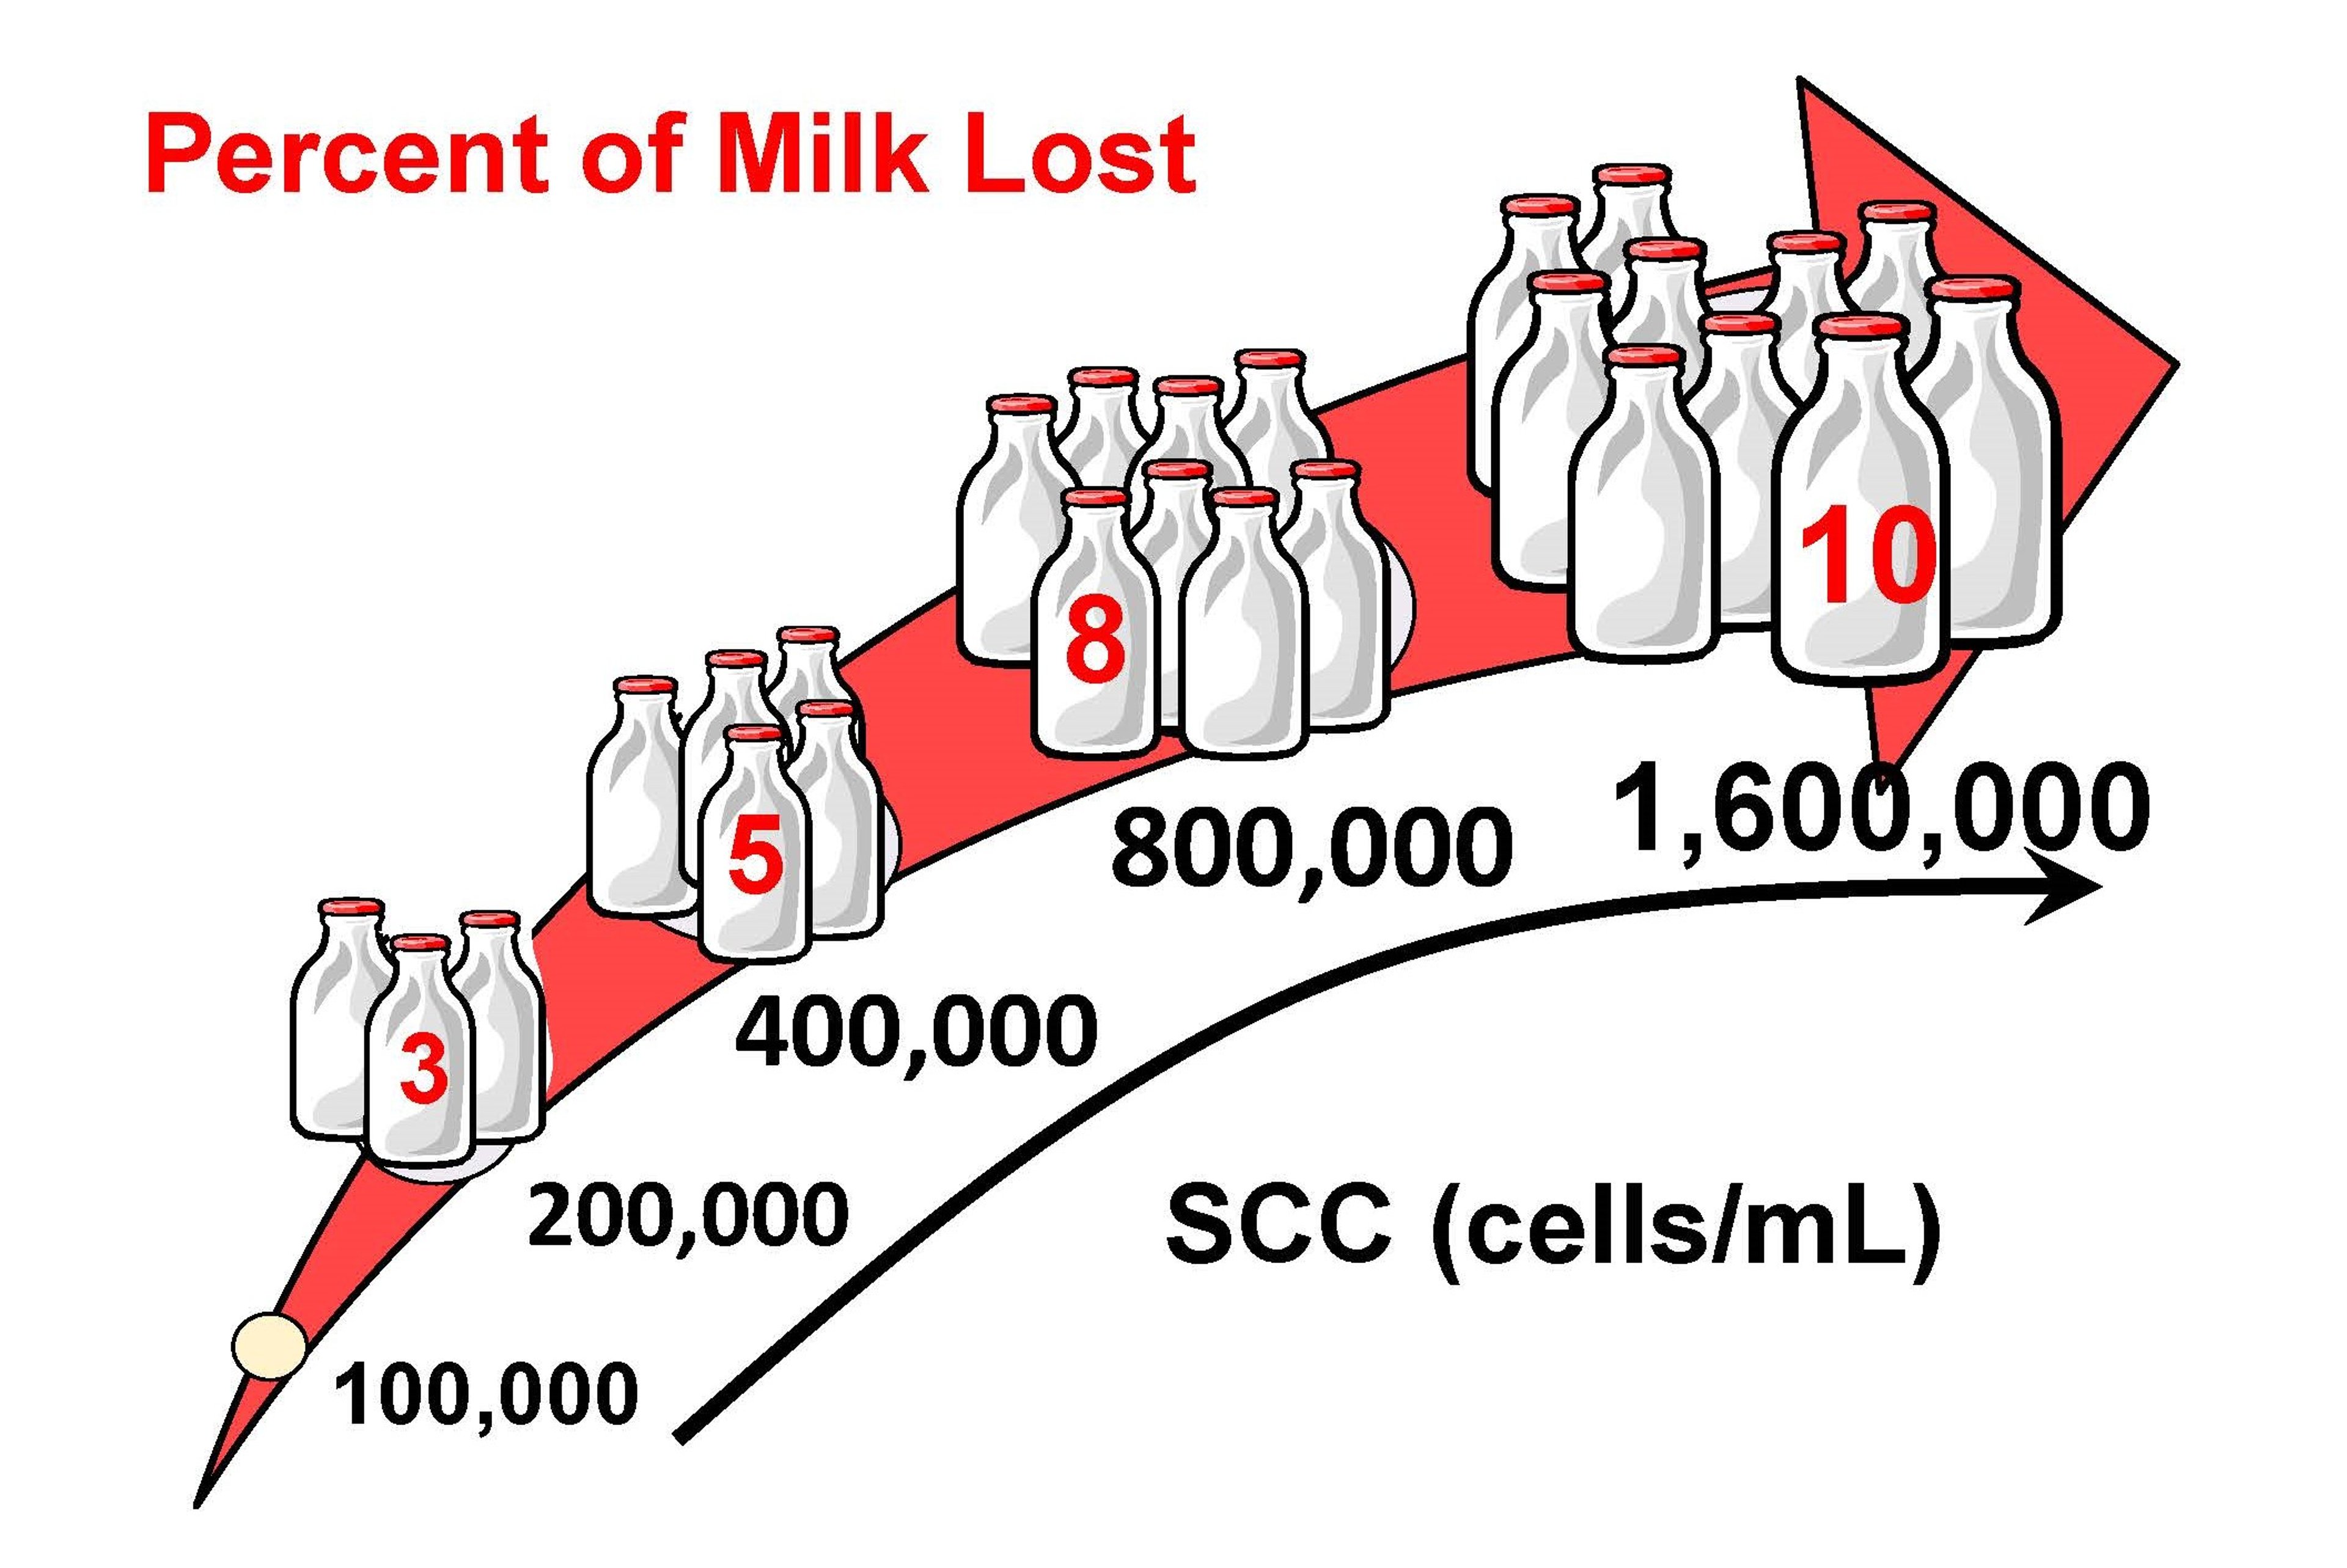 Milk loss and somatic cell counts